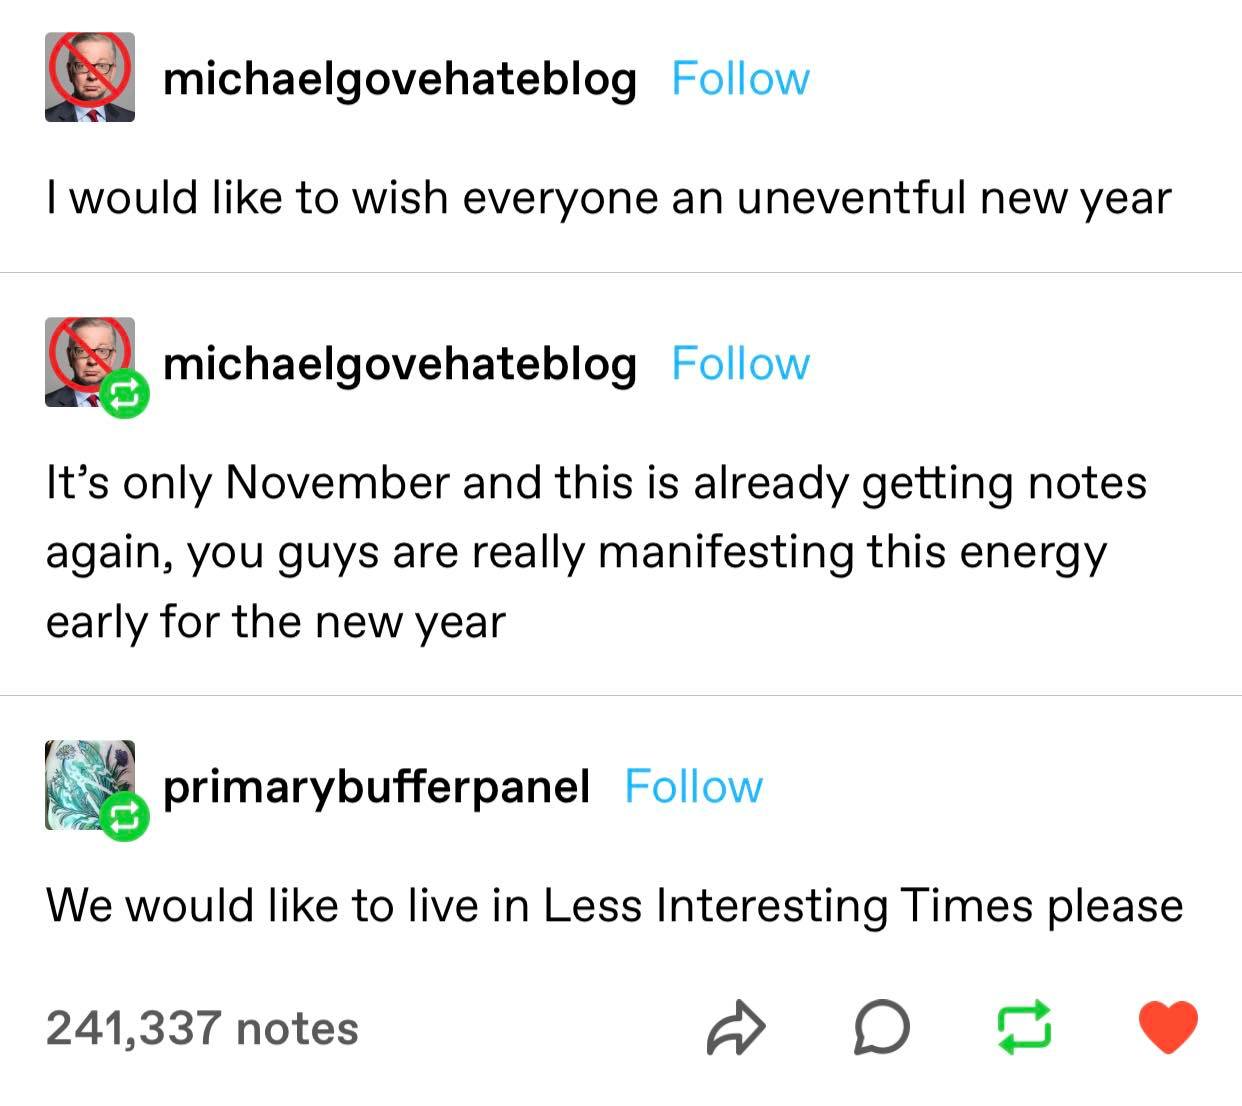 Tumblr post screenshot - michaelgovehateblog: I would like to wish everyone an uneventful new year - It's only November and this is already getting notes again, you guys are really manifesting this energy early for the new year - primarybufferpanel: We would like to live in Less Interesting Times please